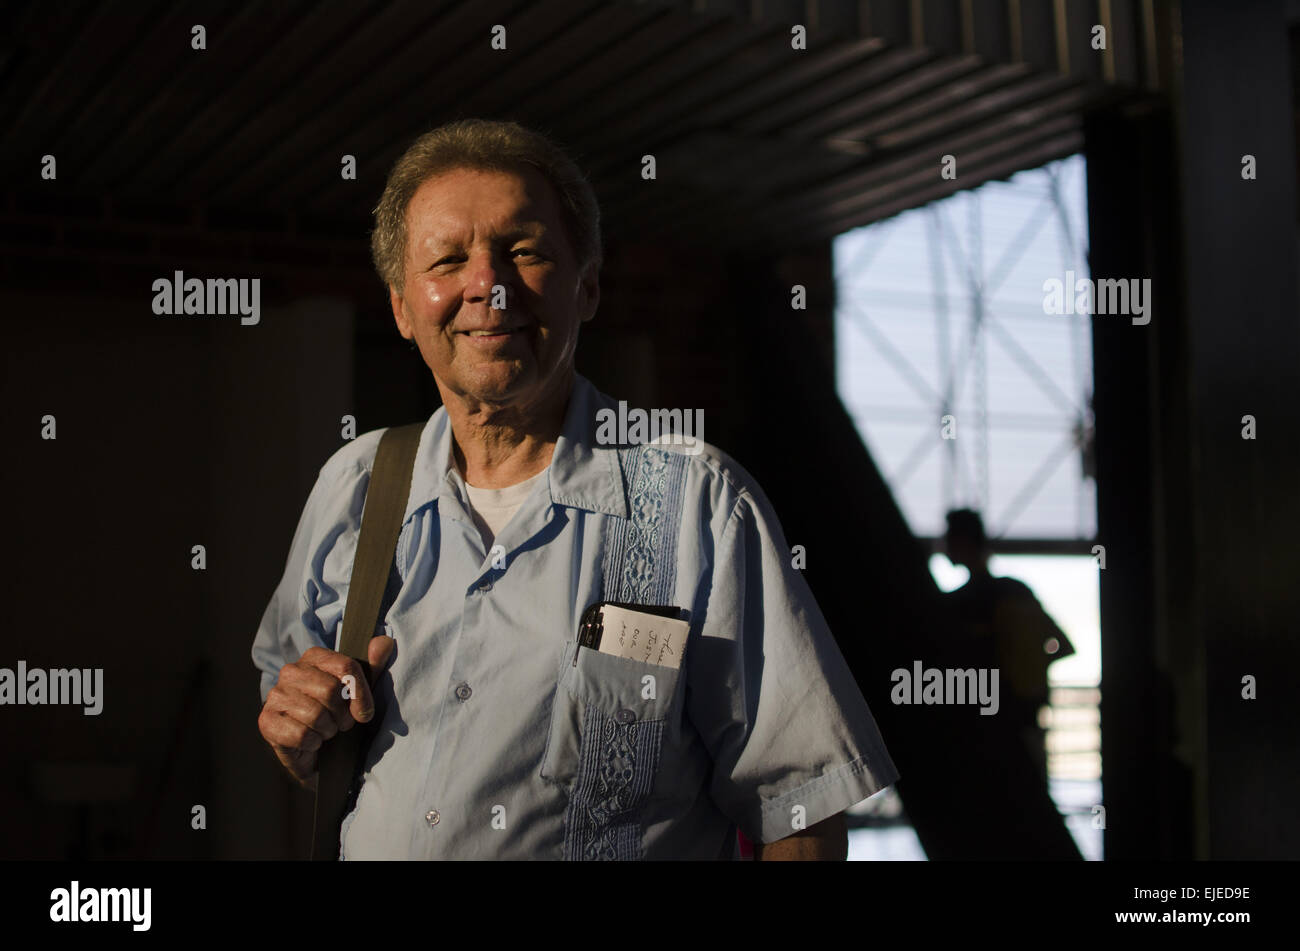 San Salvador, San Salvador, El Salvador. 24th Mar, 2015. ROY BOURGEOIS poses for a photo following a panel discussion at the Universidad Centroamericana on March 24, 2015. Founder of School of the Americas Watch and a Maryknoll priest of more than 40 years, he was expelled from the Church when he refused to recant his stance in favor of the ordination of women into the priesthood. © ZUMA Wire/ZUMAPRESS.com/Alamy Live News Stock Photo